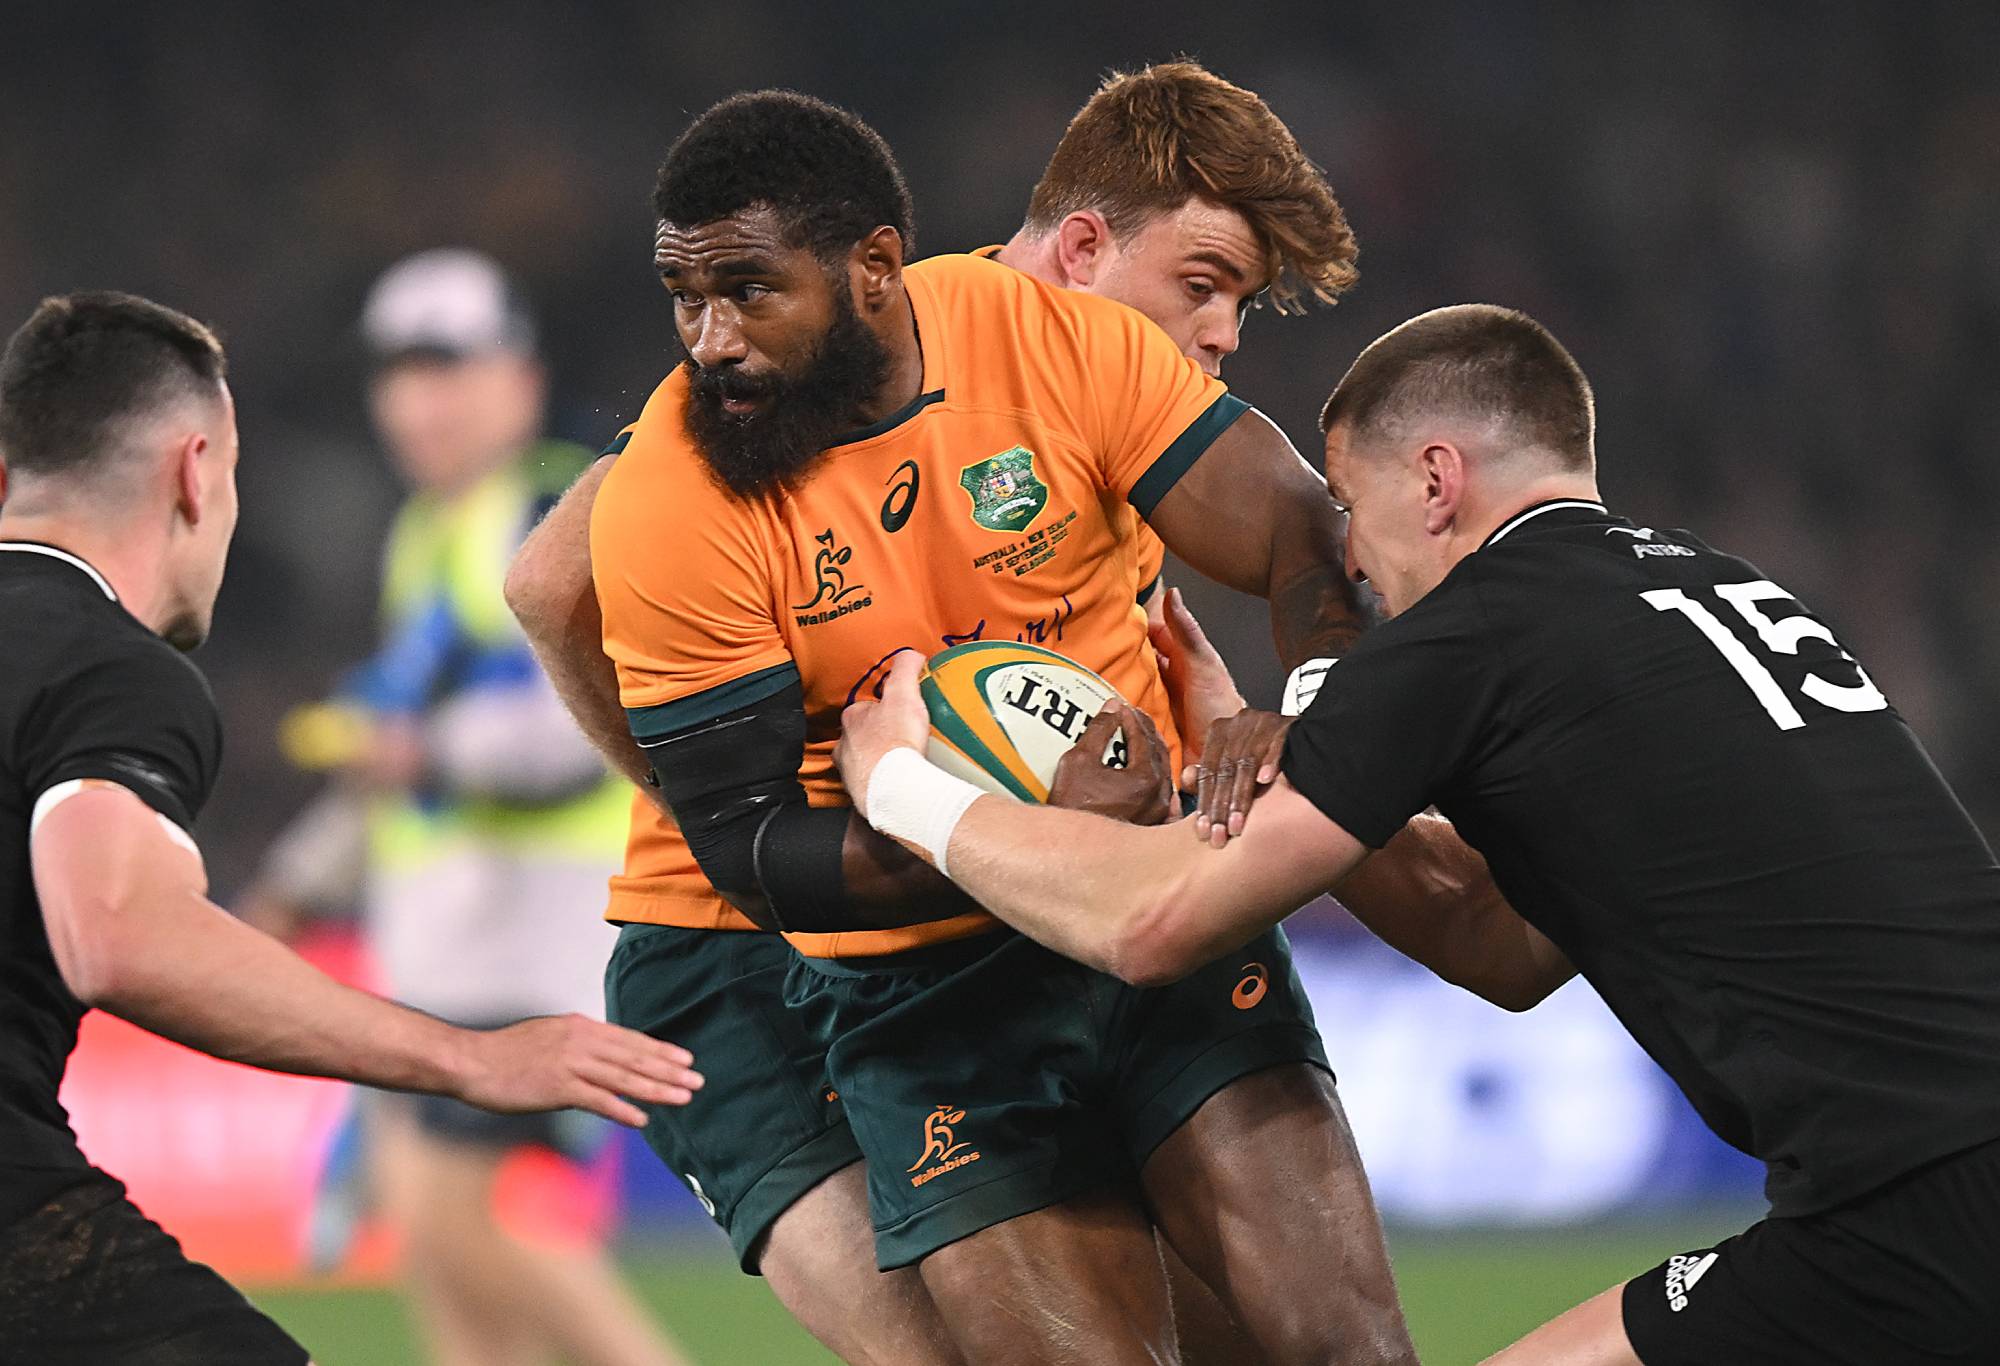 Marika Koroibete of the Wallabies is tackled during The Rugby Championship & Bledisloe Cup match between the Australia Wallabies and the New Zealand All Blacks at Marvel Stadium on September 15, 2022 in Melbourne, Australia. (Photo by Morgan Hancock/Getty Images)